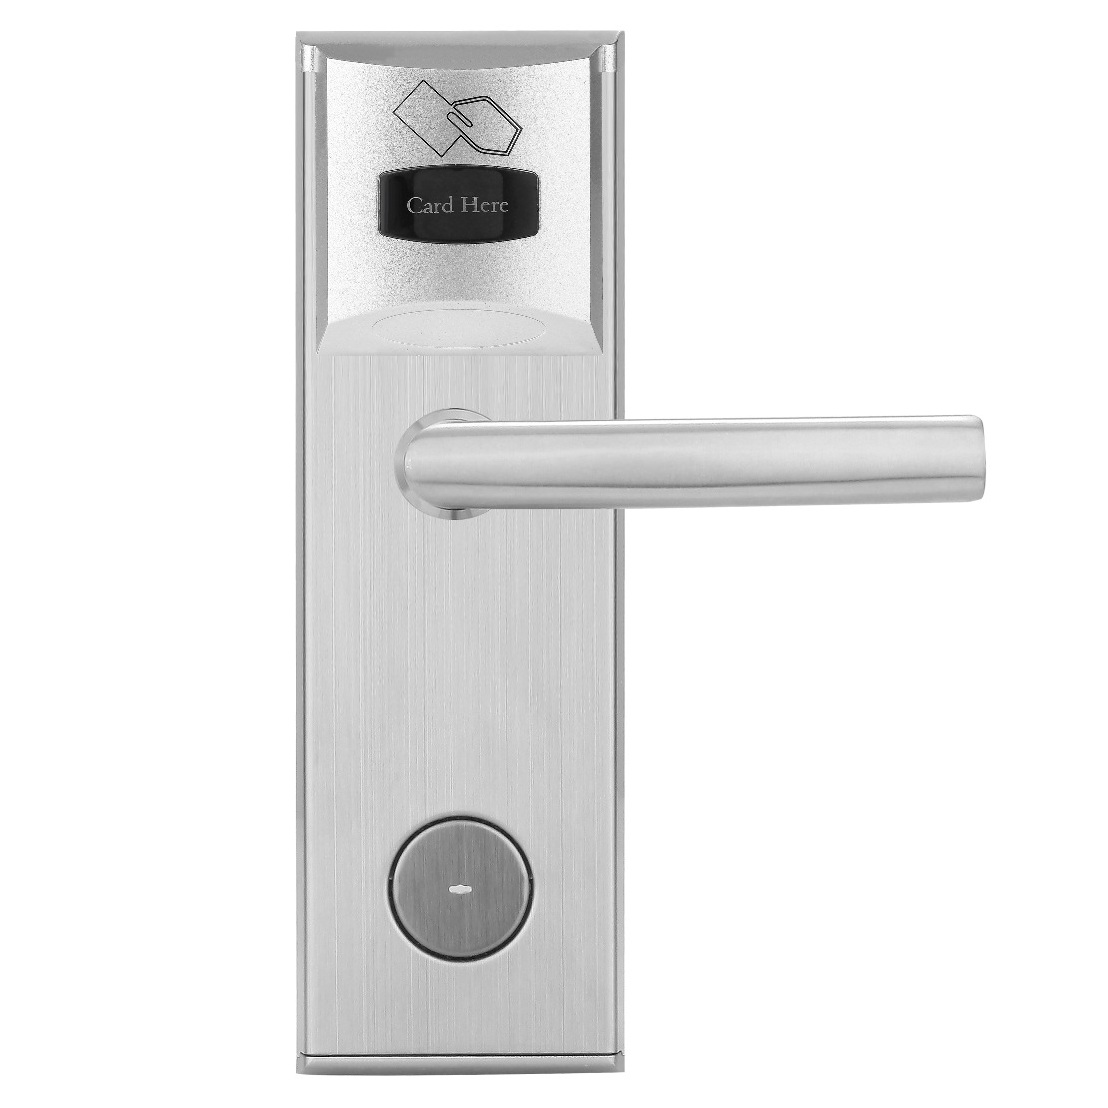 China hot Selling Smart Hotel Door Lock System Price